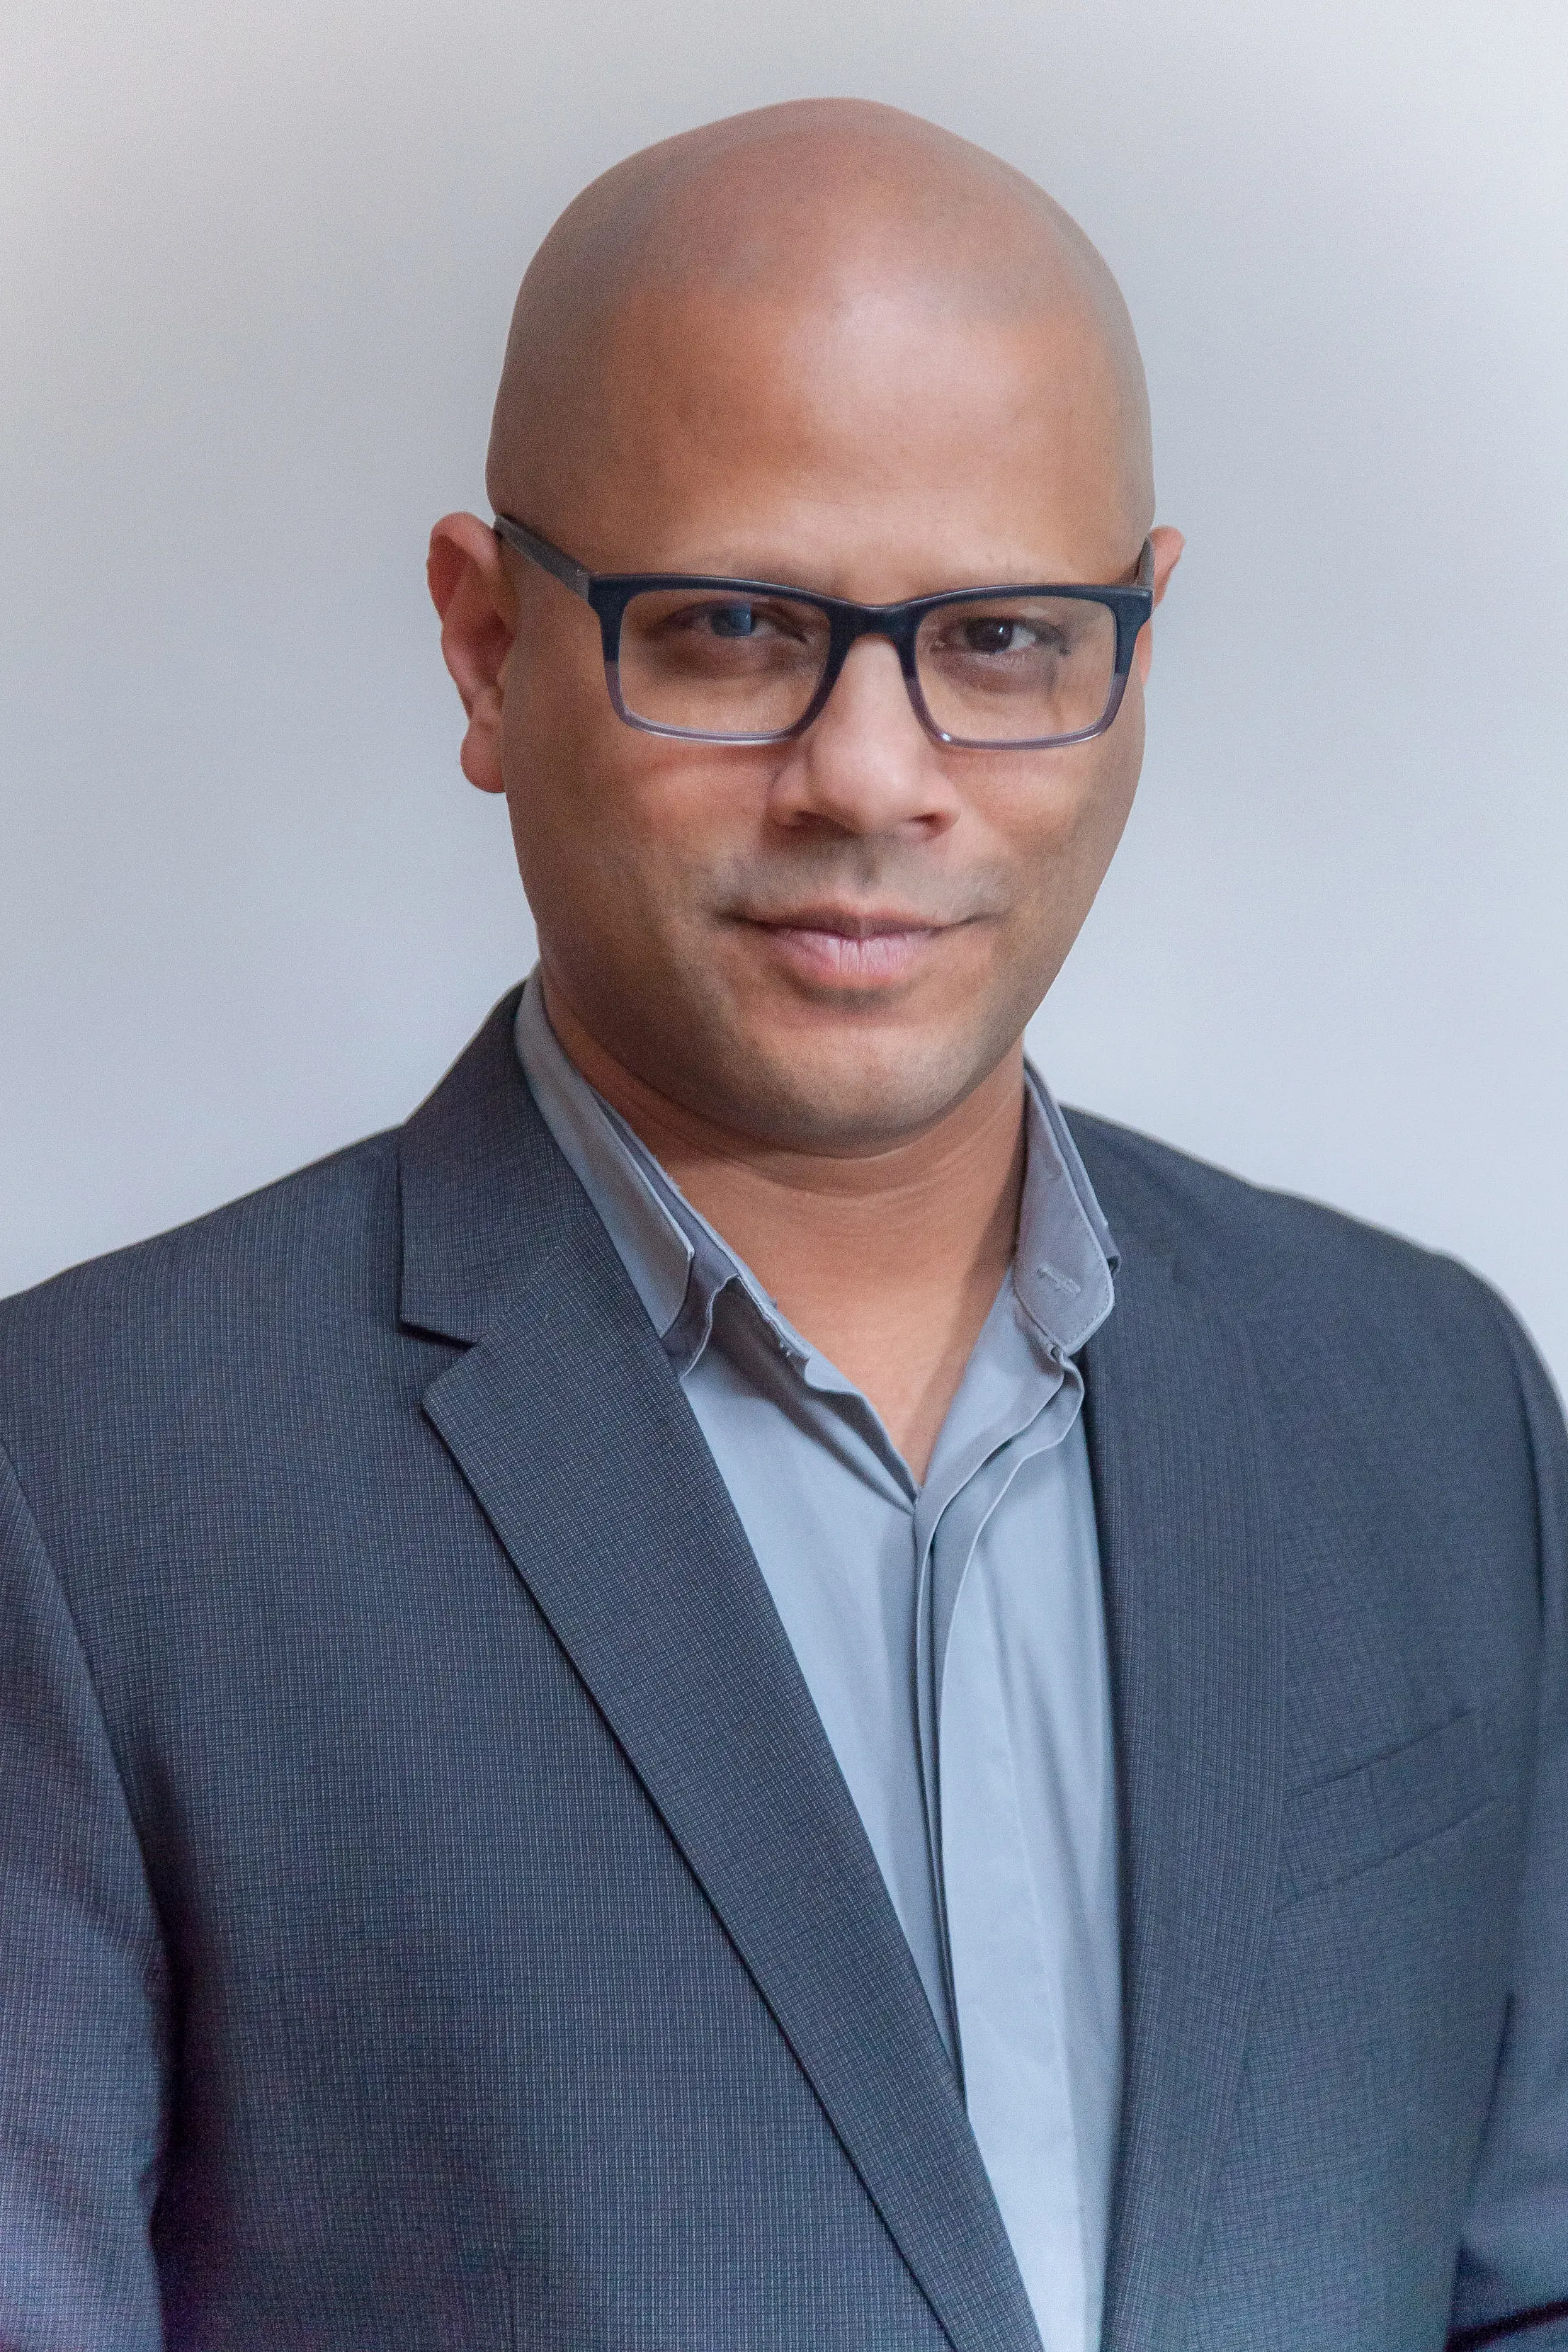 Color portrait photo of Hasan in light grey shirt with grey blazer, a shaved head and dark glass with a slight smile looking directly at the camera.